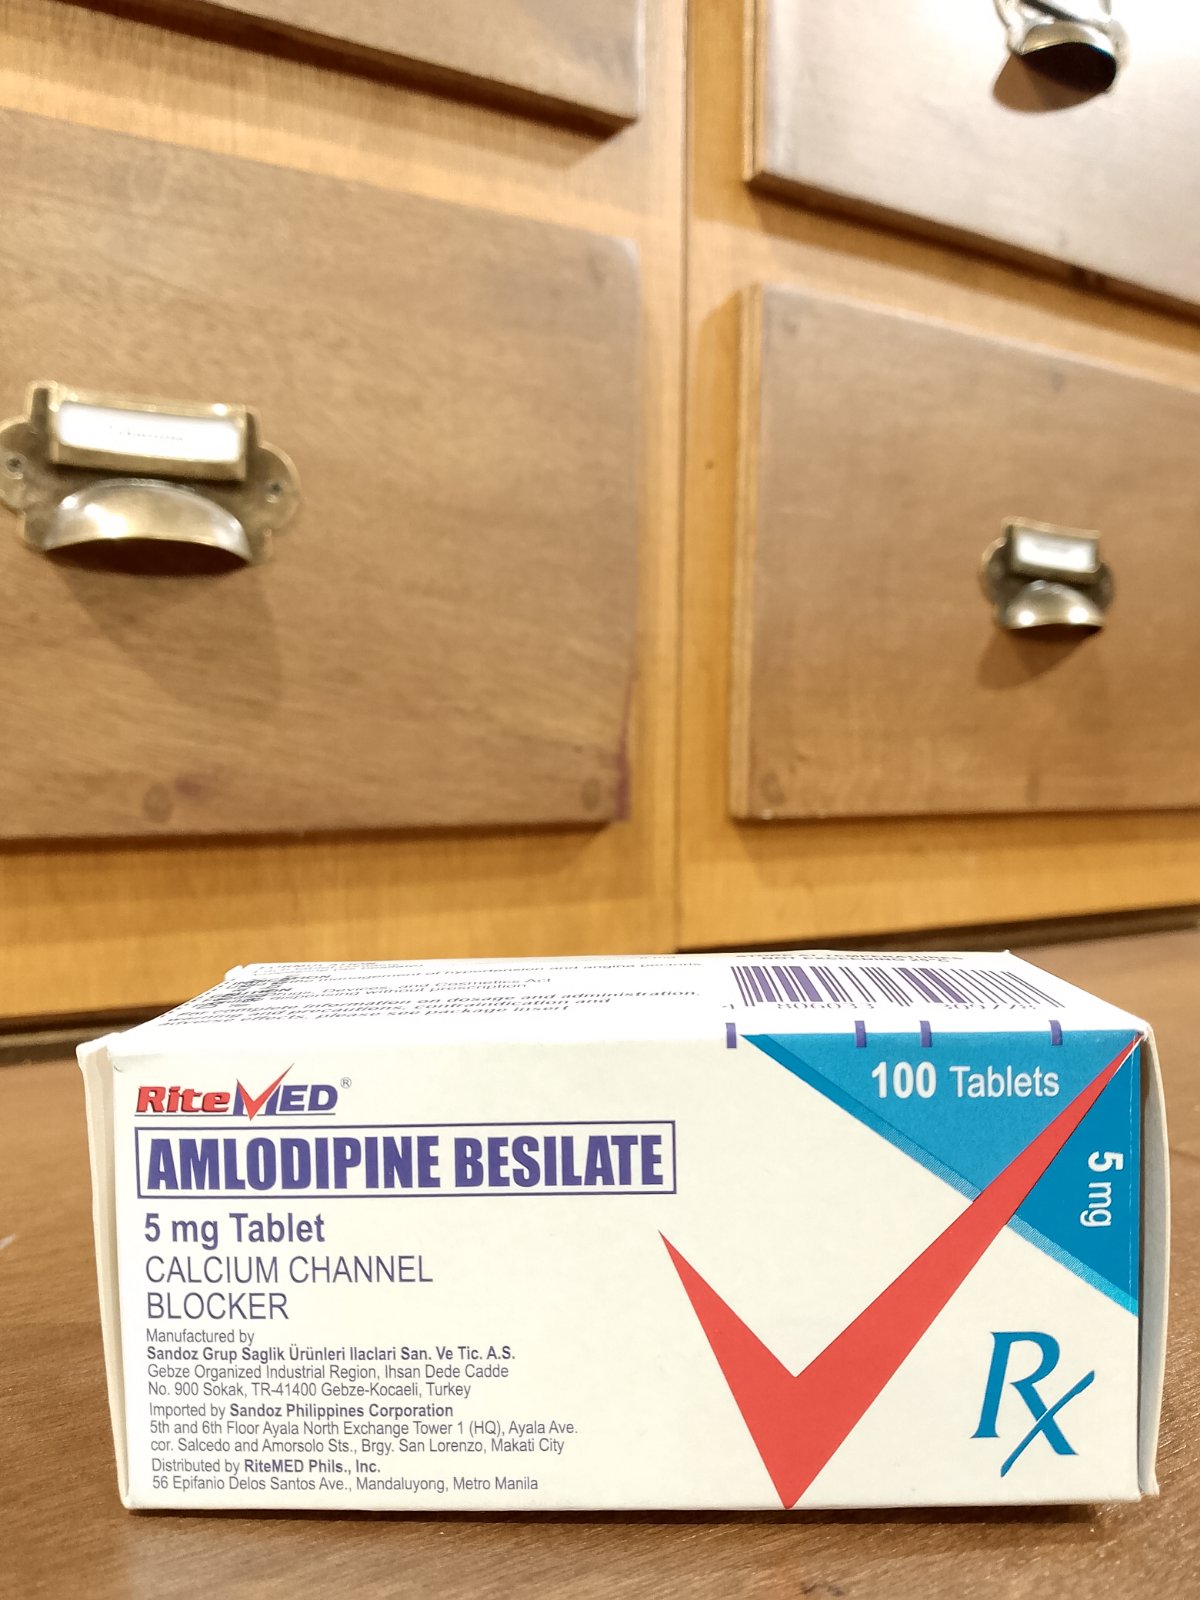 Amlodipine Besilate [Ritemed] 5mg Tablet